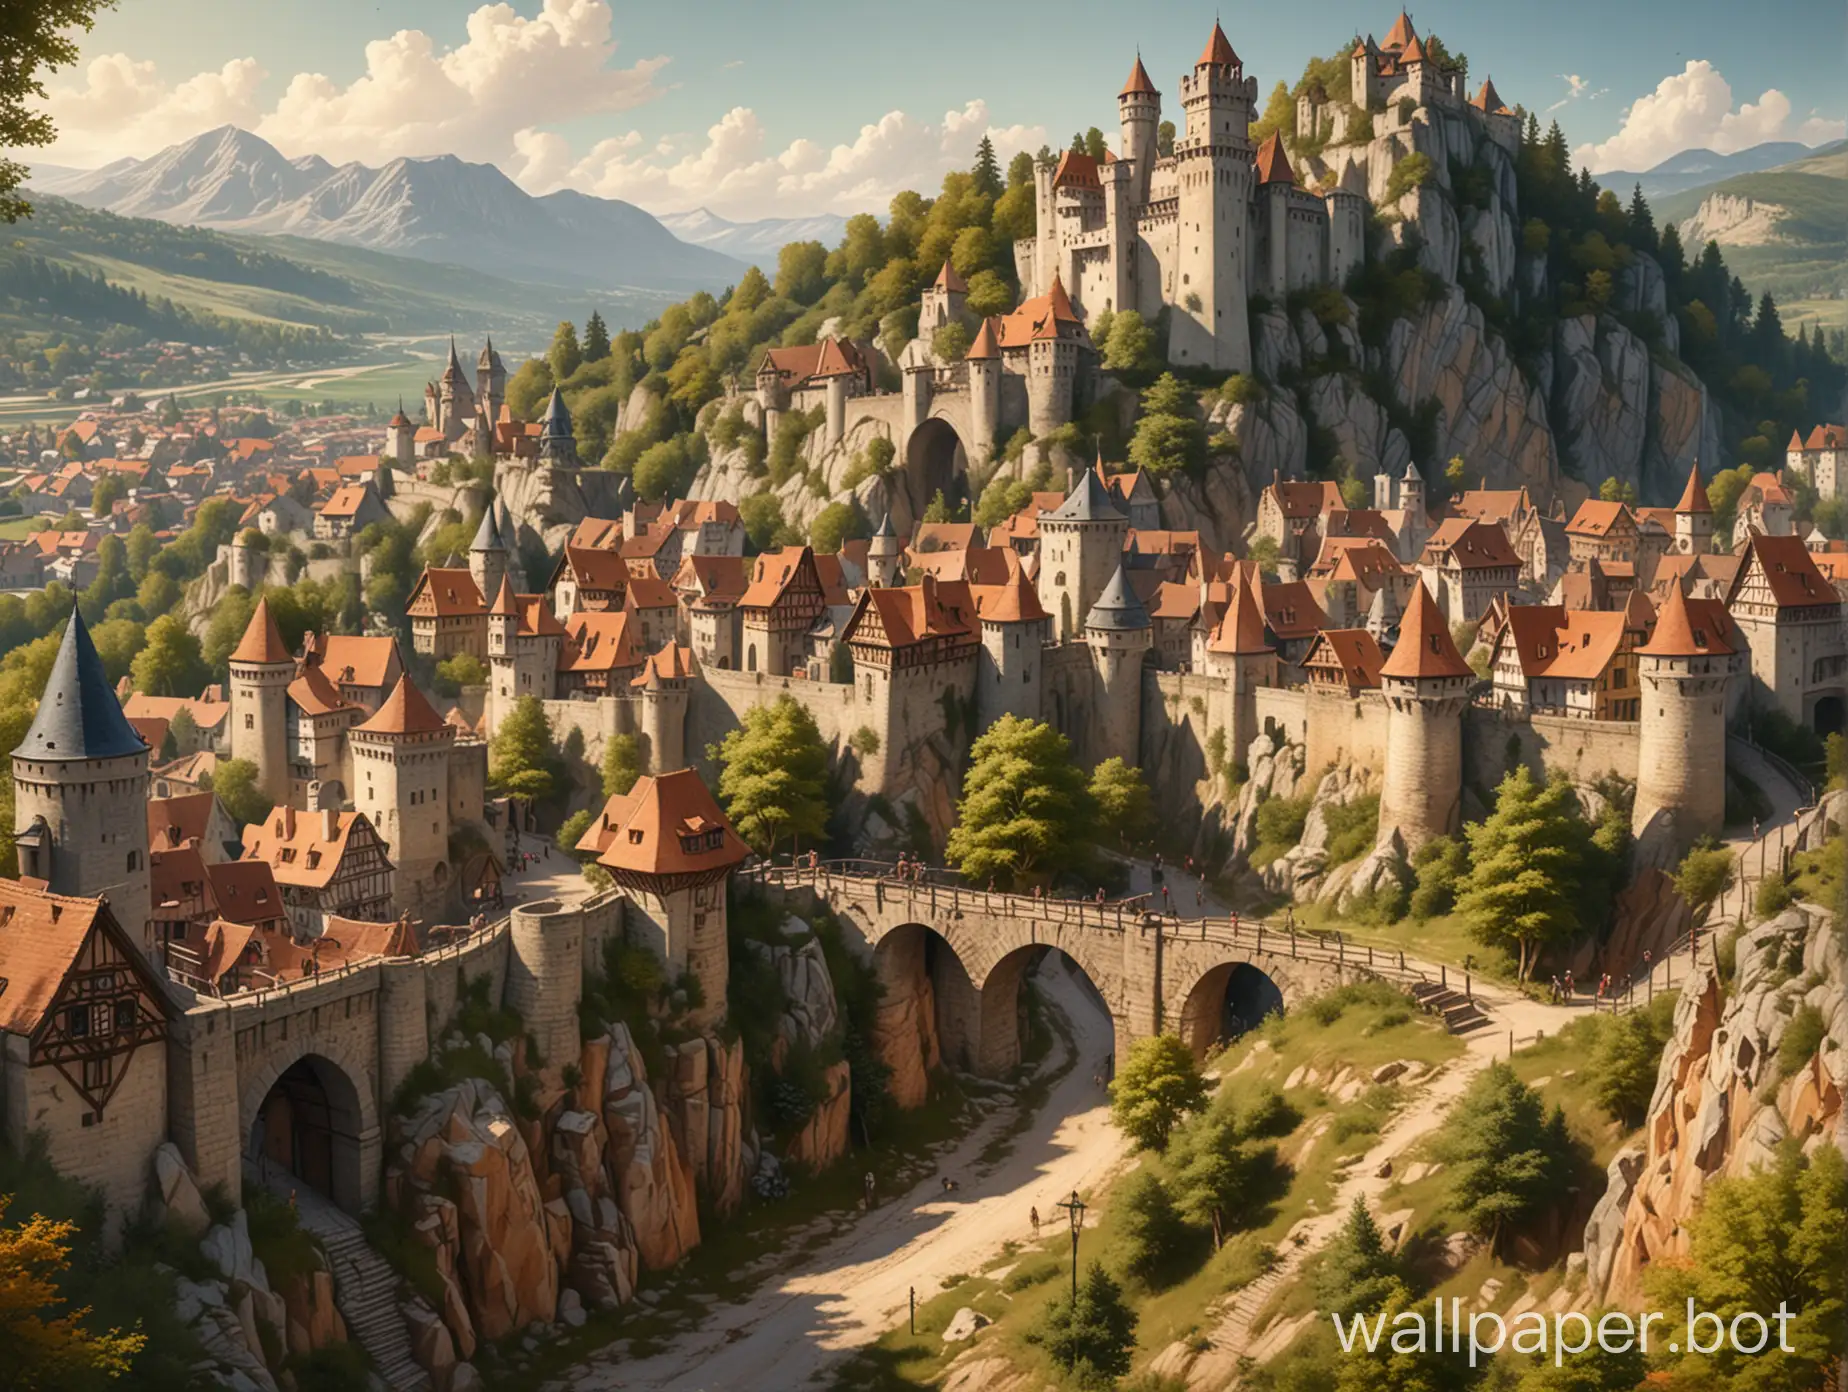 Landscape, mountain in the background, entire medieval village, fantasy, meadow, ramparts, fortifications, close aerial view of the town, view of the entrance to the city with a drawbridge, large trees, drawn style, colored, warm colors, drawing, detailed image, visible details, forest in the background